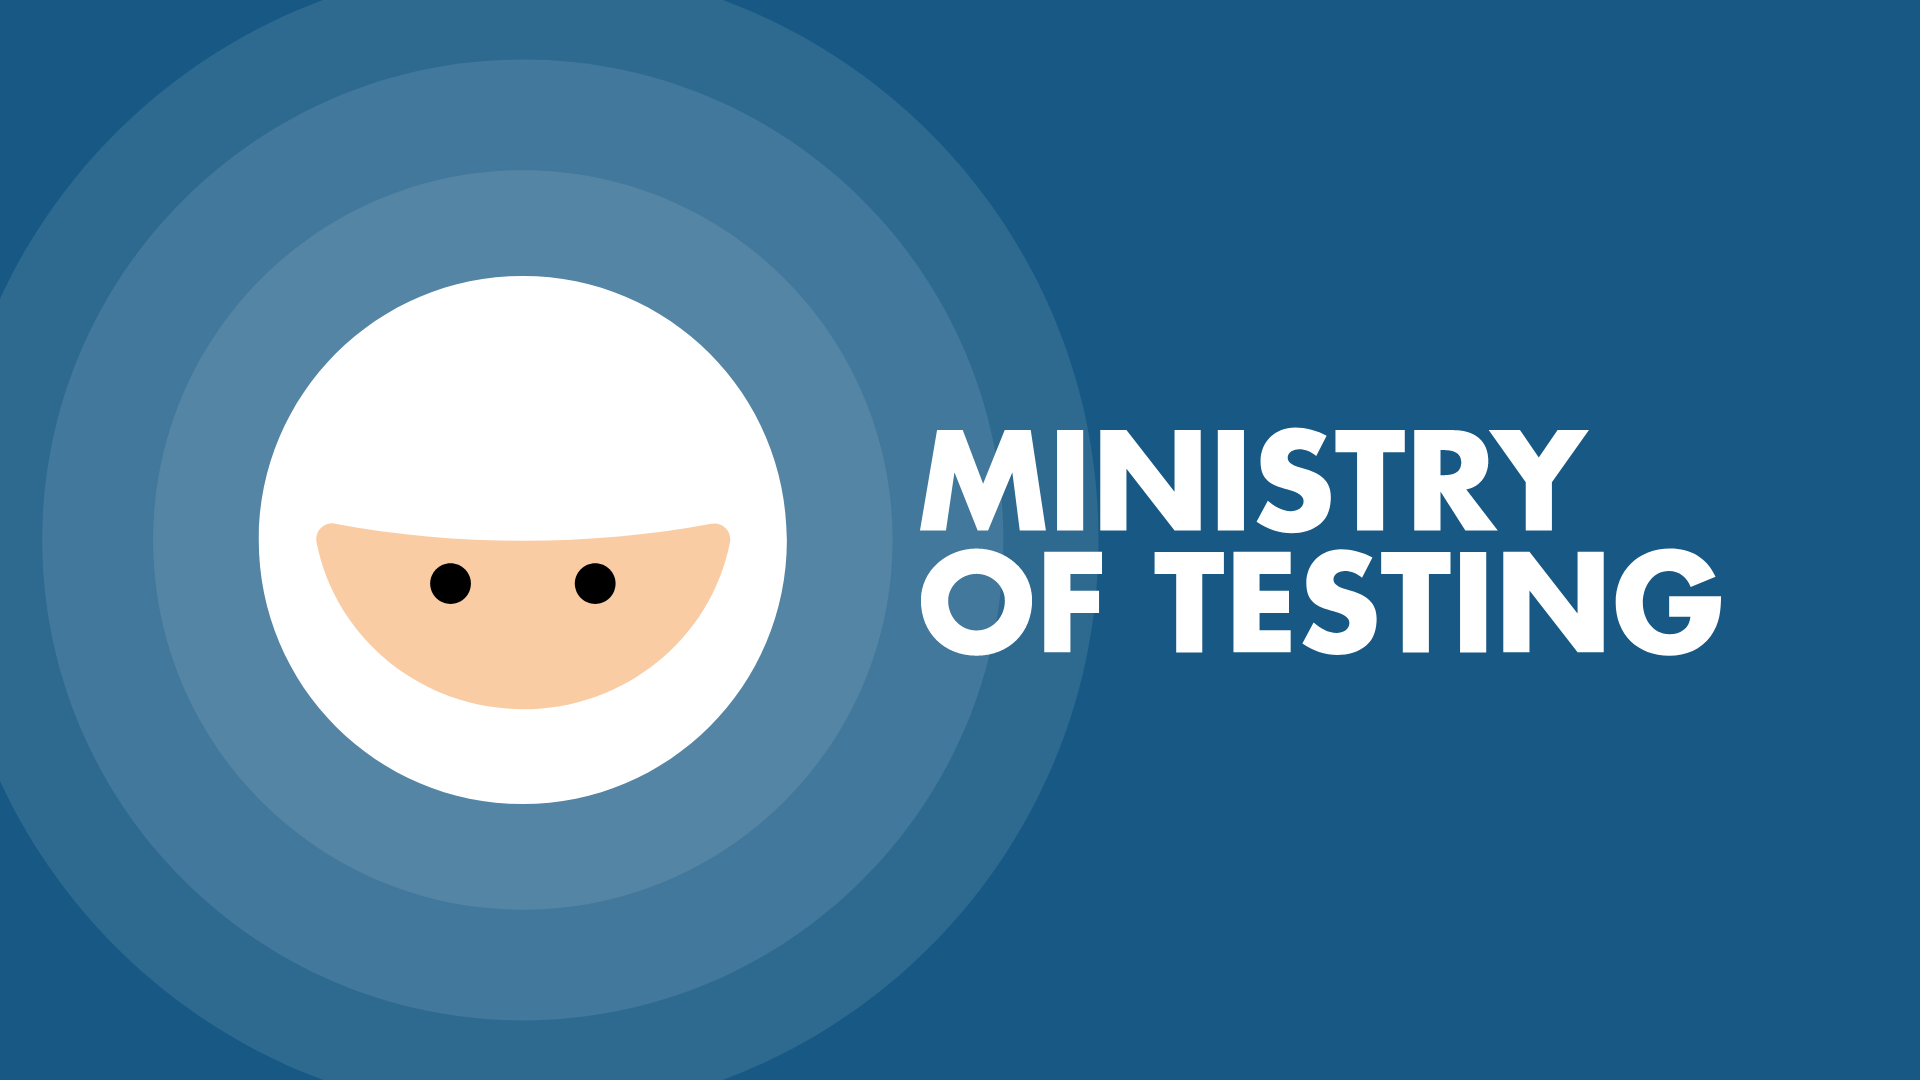 Masters of the Ministry: The Community’s Best Software Testing Training